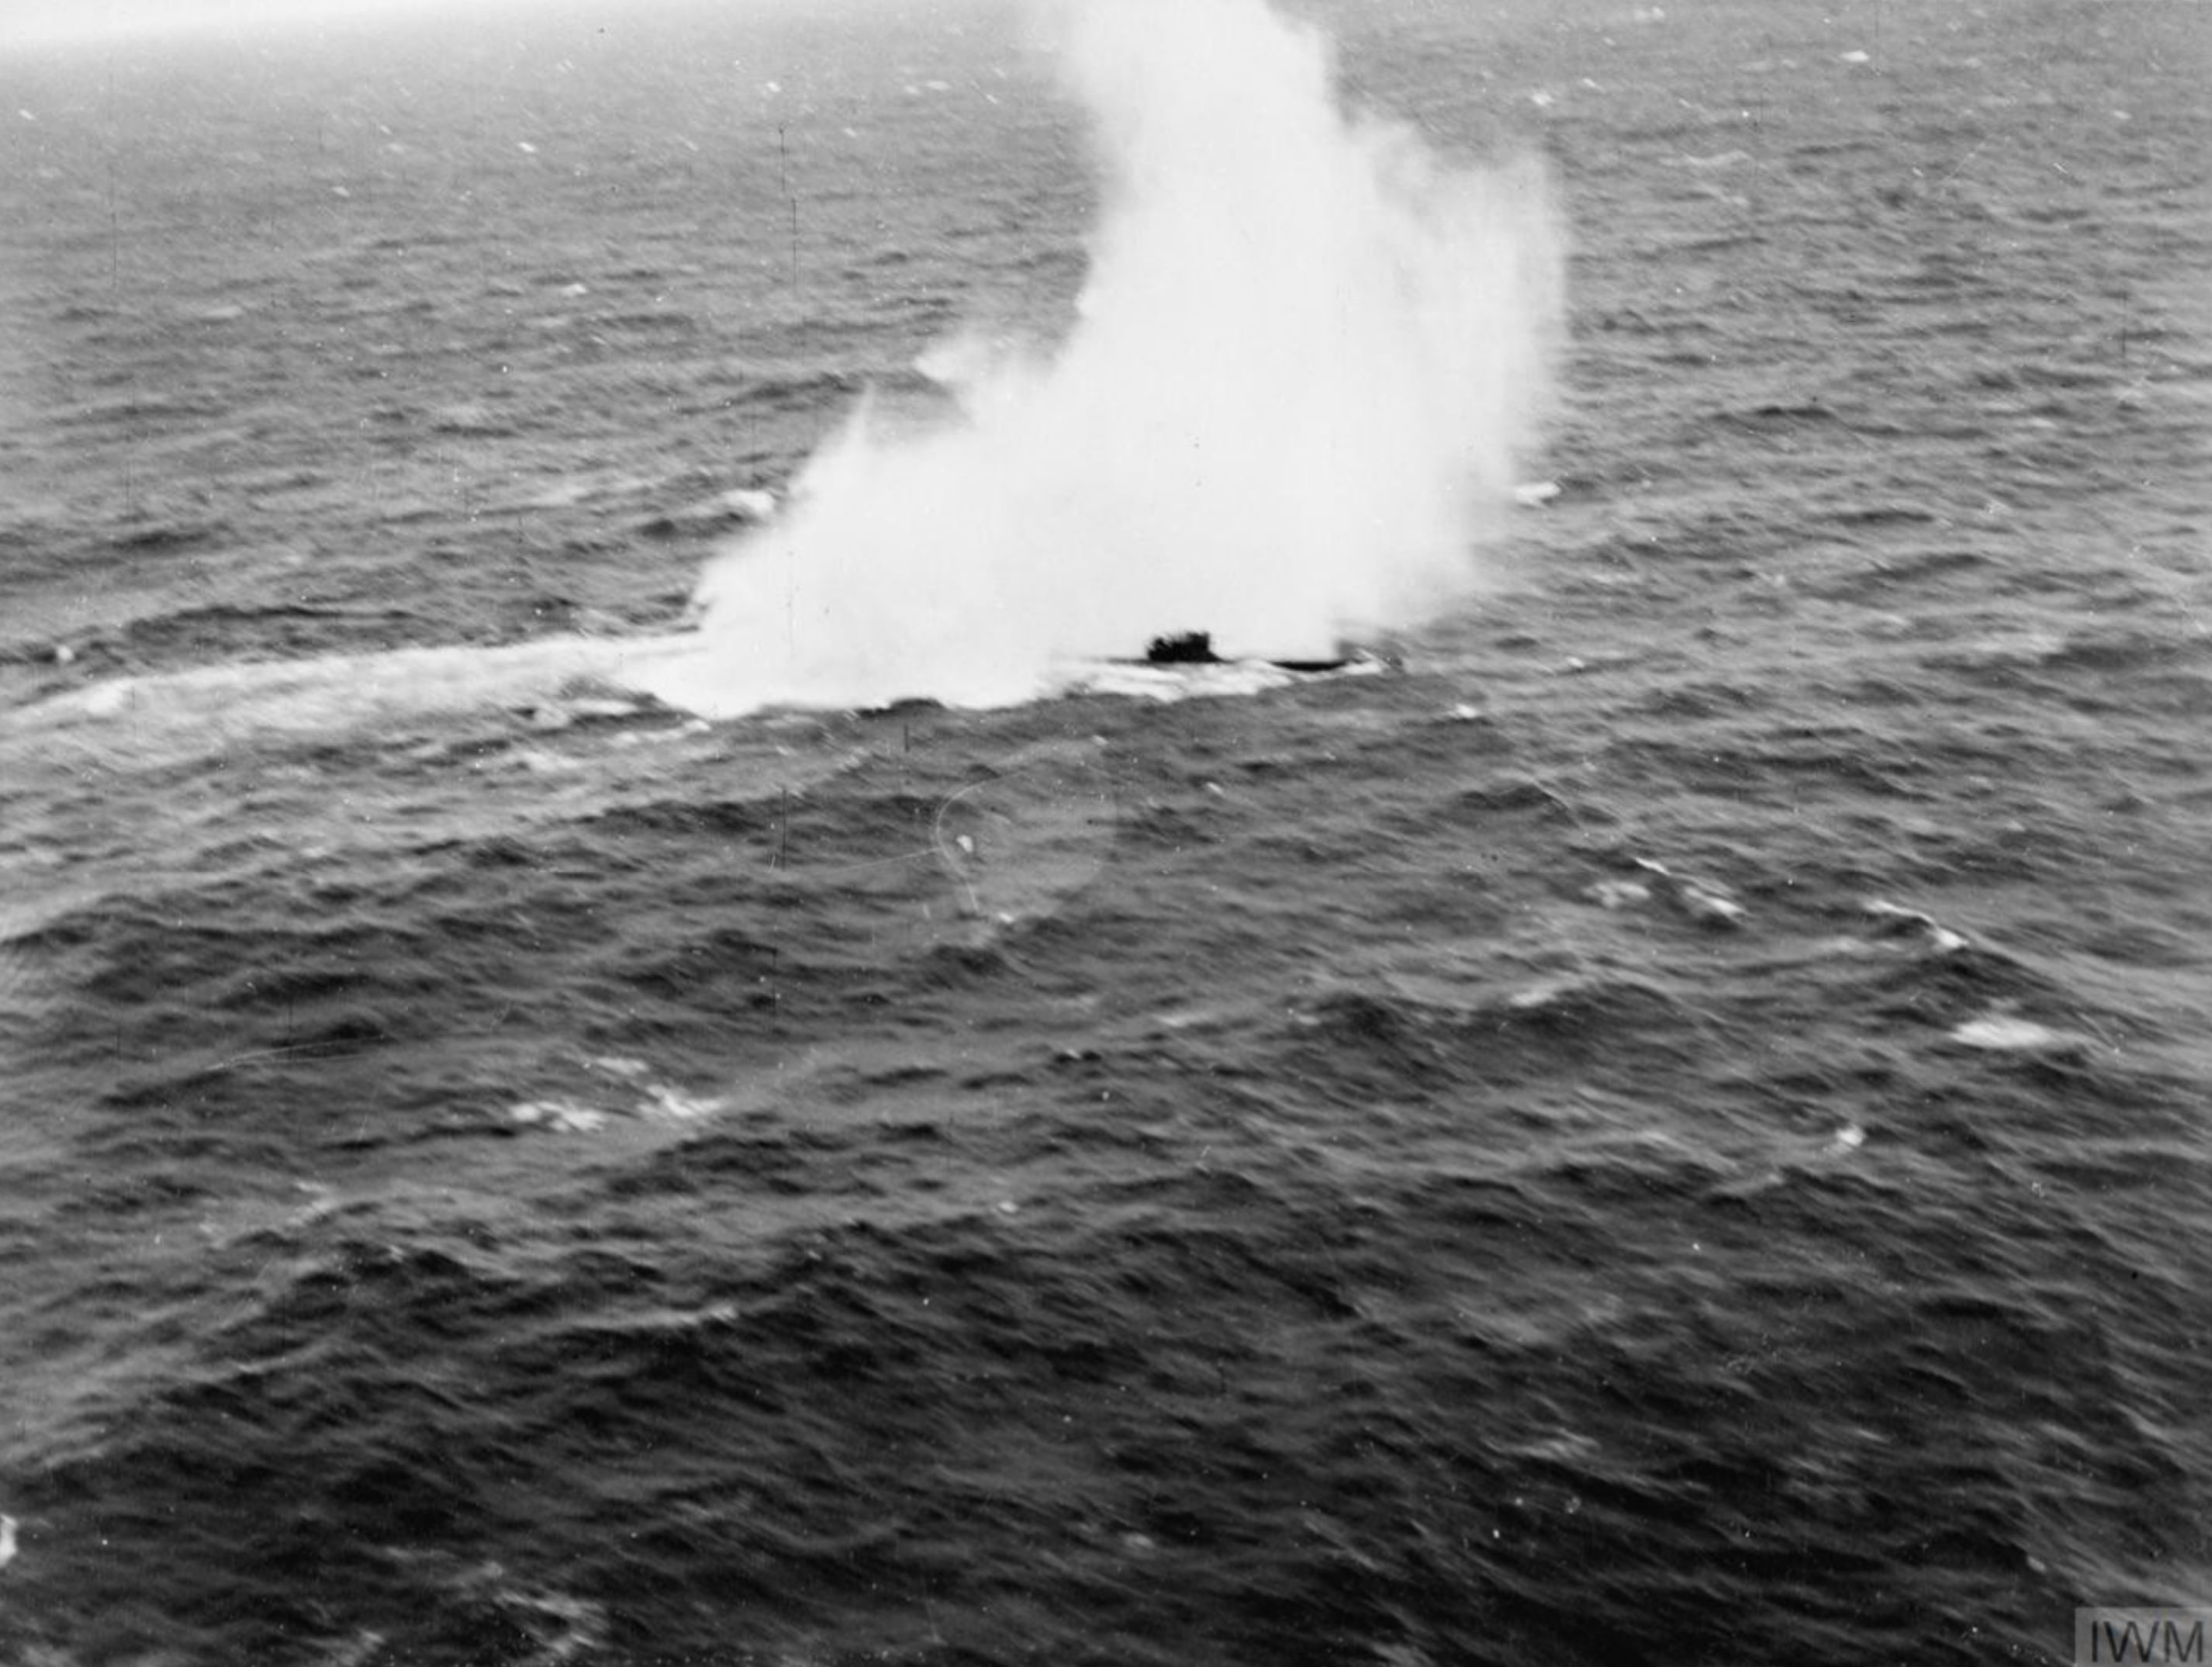 Fleet Air Arm aircraft from HMS Fencer attacking a U boat with depth charges May 1944 IWM A23574